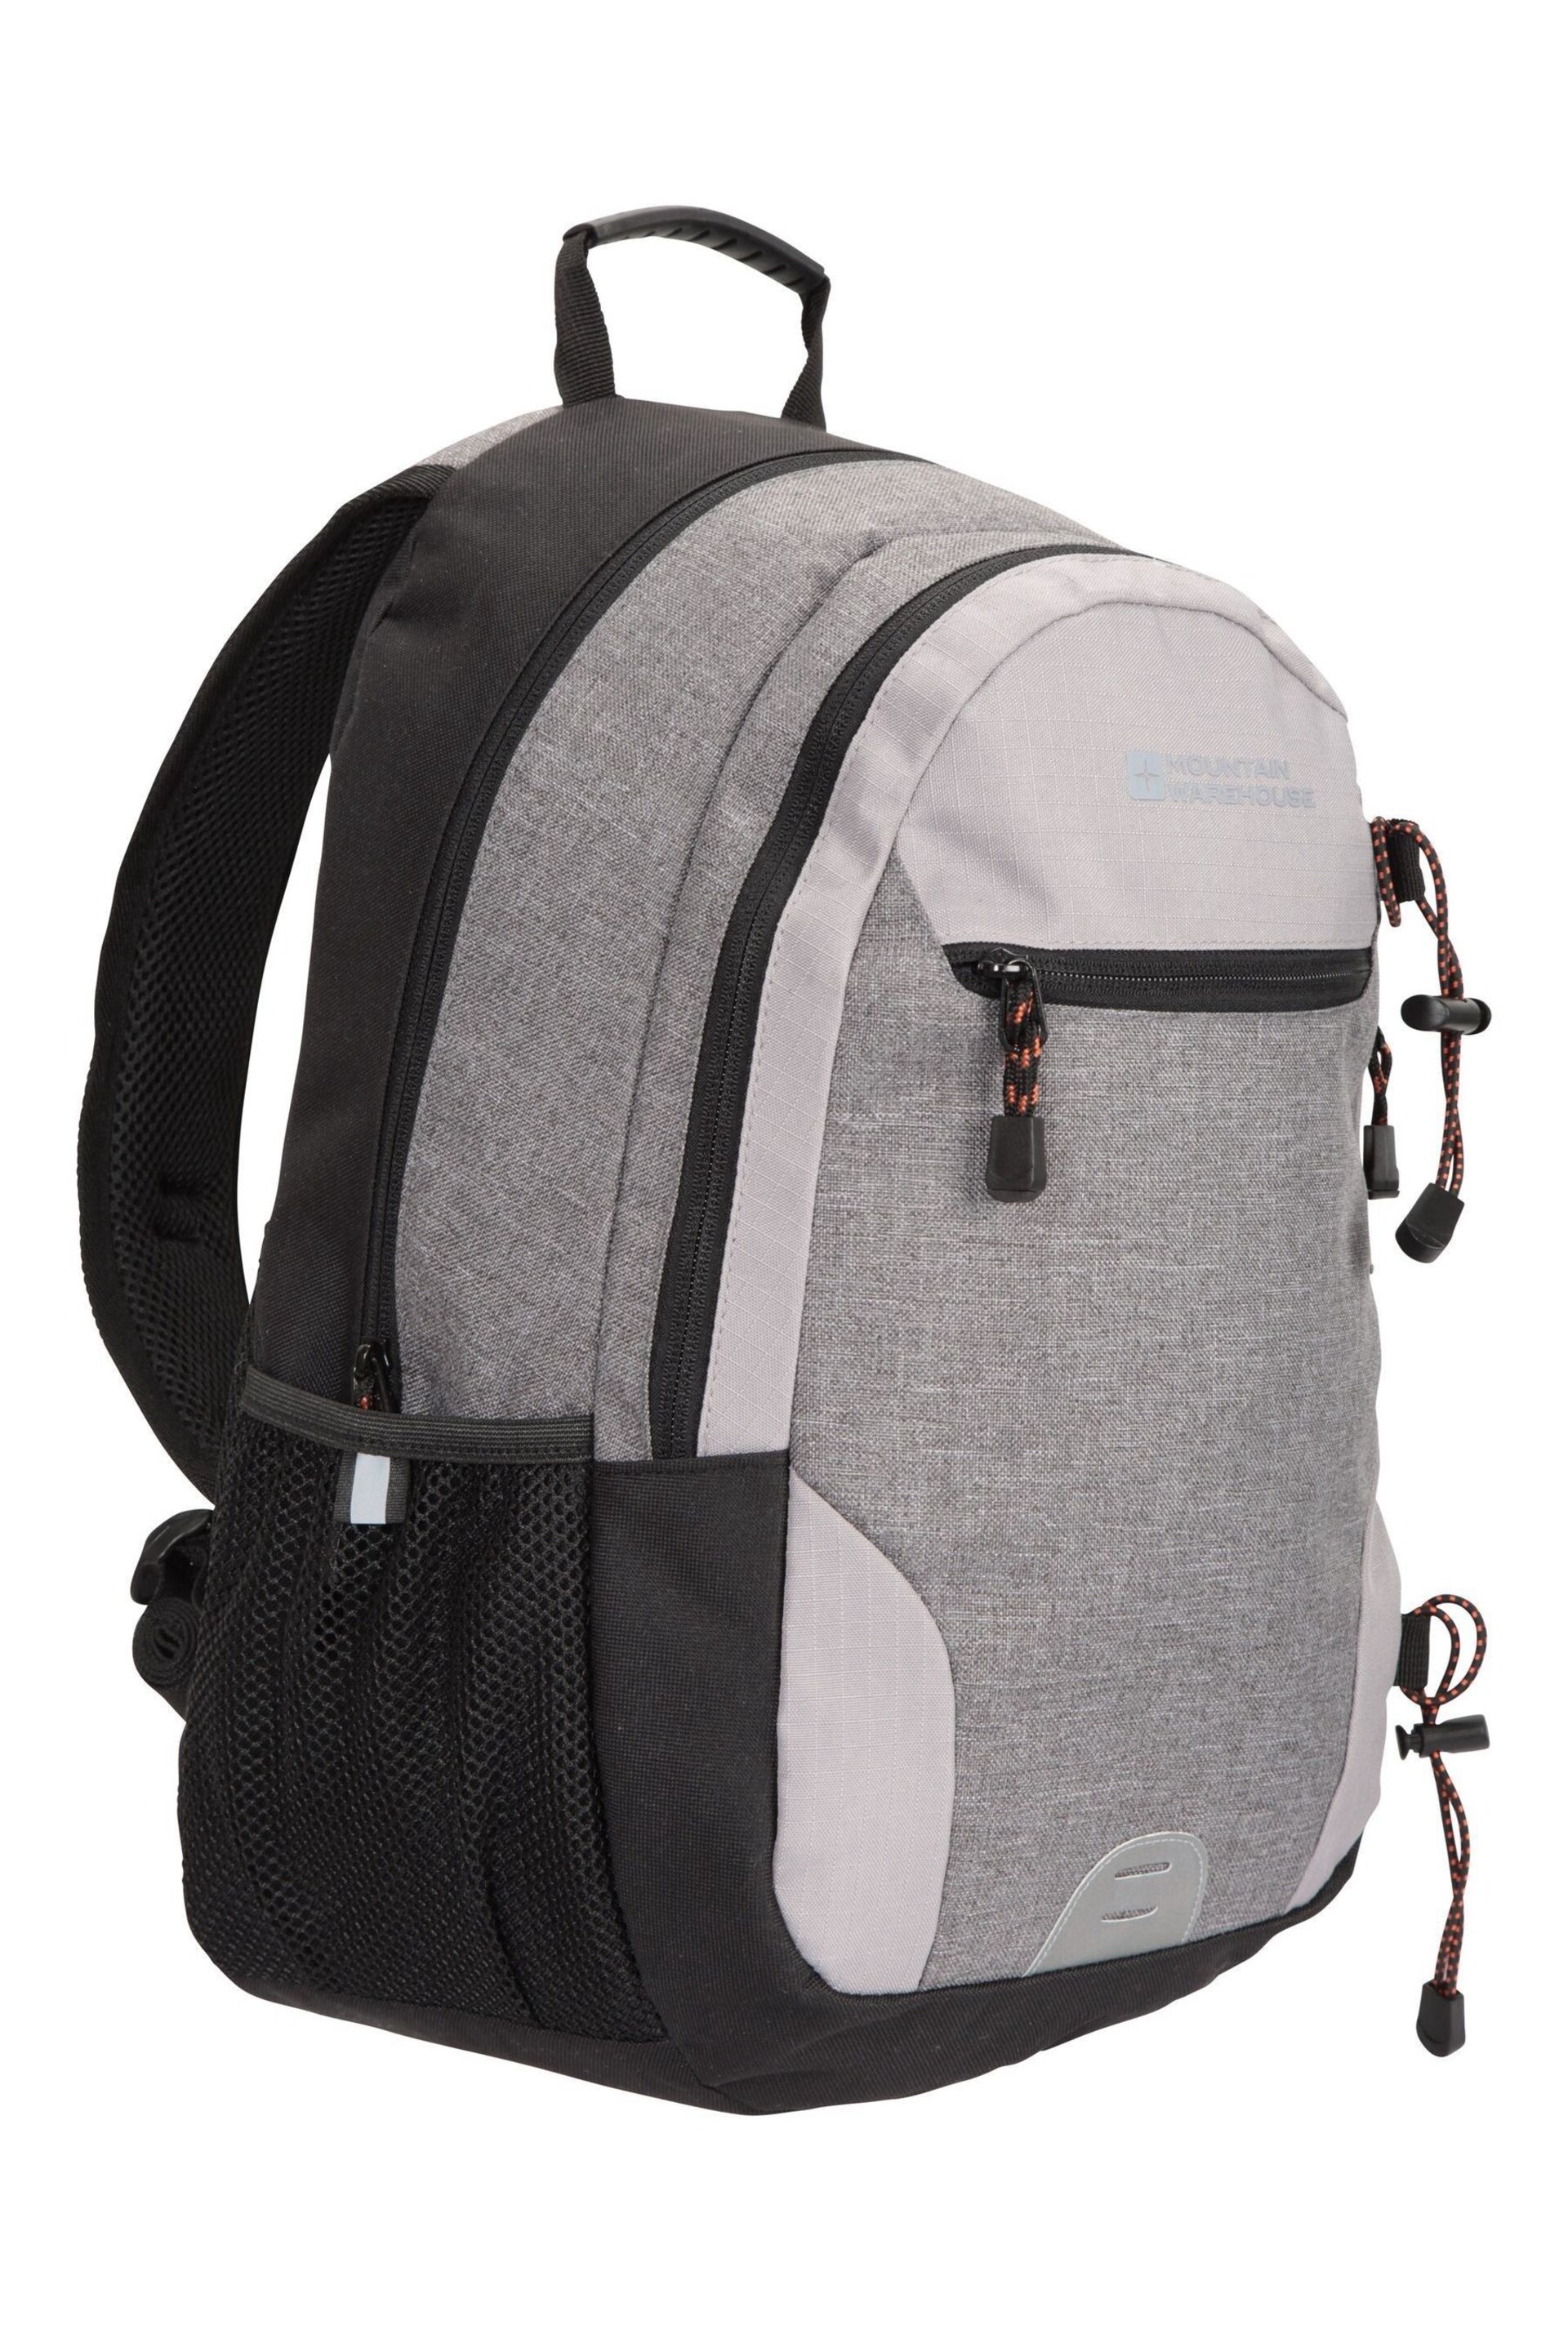 Mountain Warehouse Grey Quest 23L Laptop Bag - Image 1 of 4